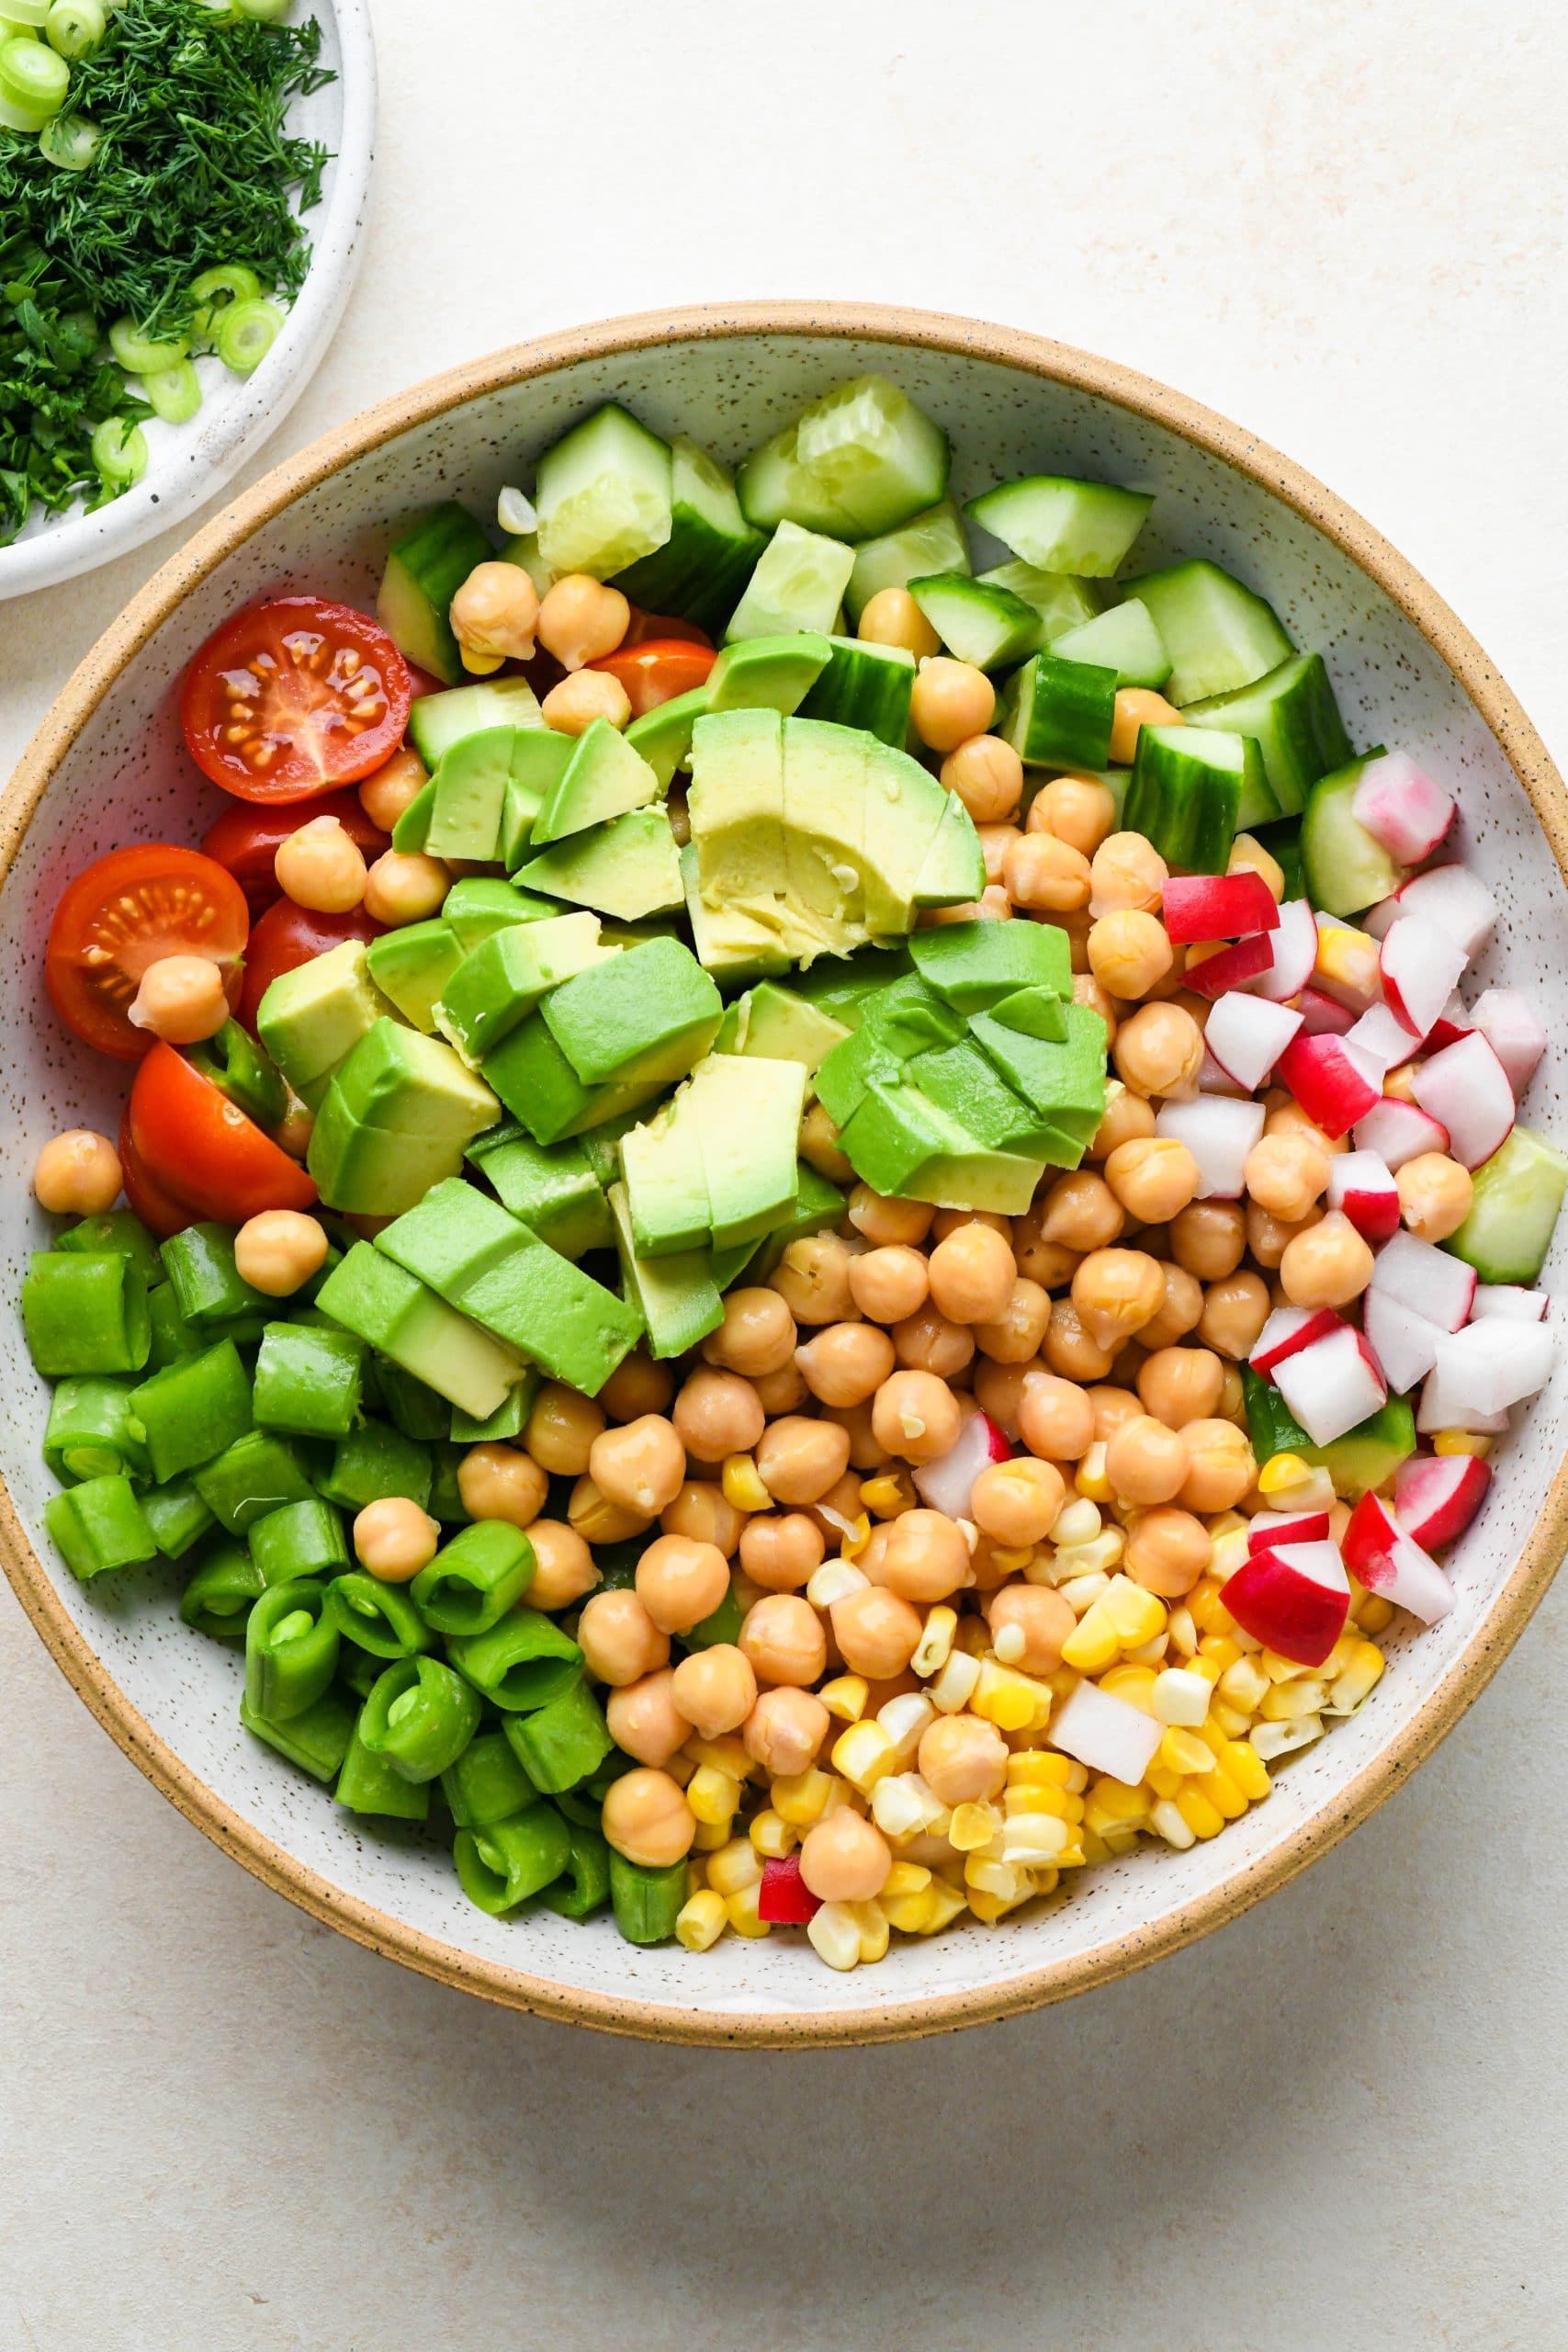 How to make vegan chickpea salad: Salad ingredients in a large bowl.